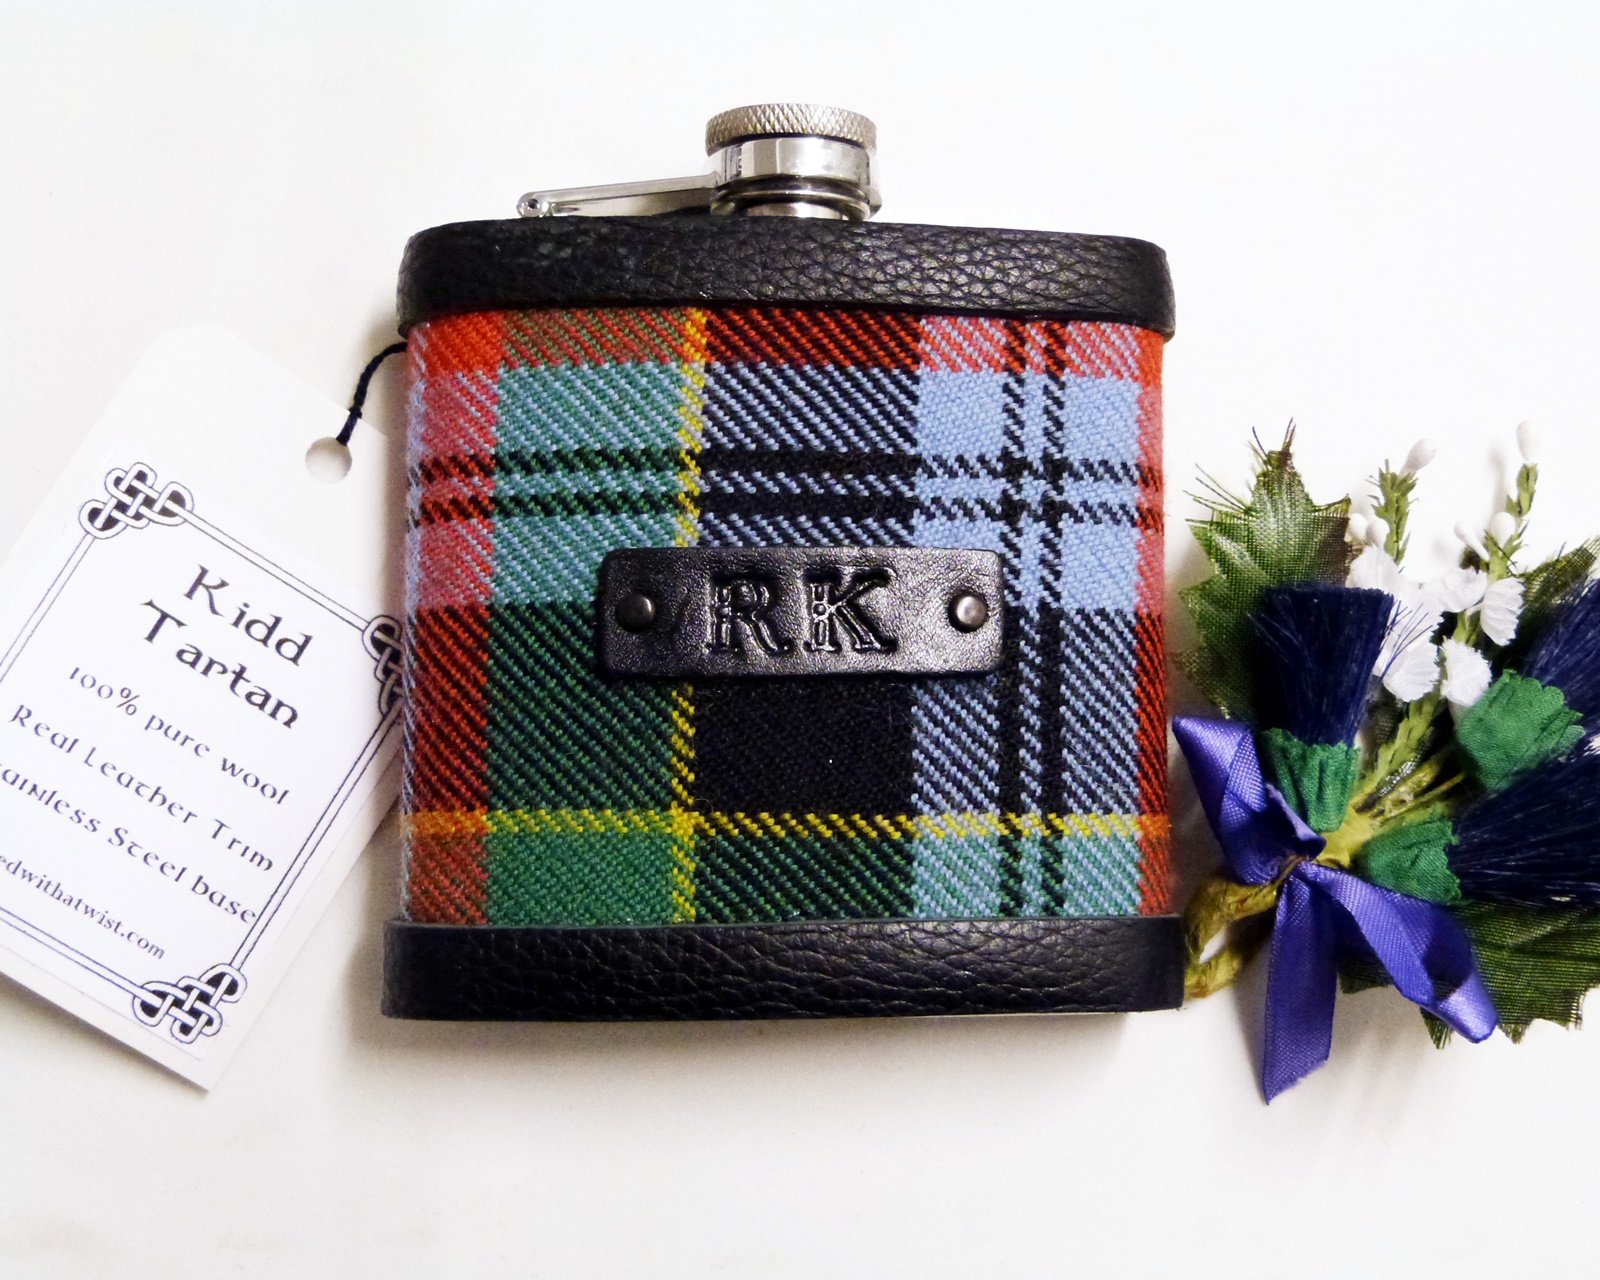 Harris Tweed  Hip Flasks  with initials embossed on black or brown leather labels for Best Man,  Father of Bride or groomsmen, Scottish luxury gift sets of 3-6